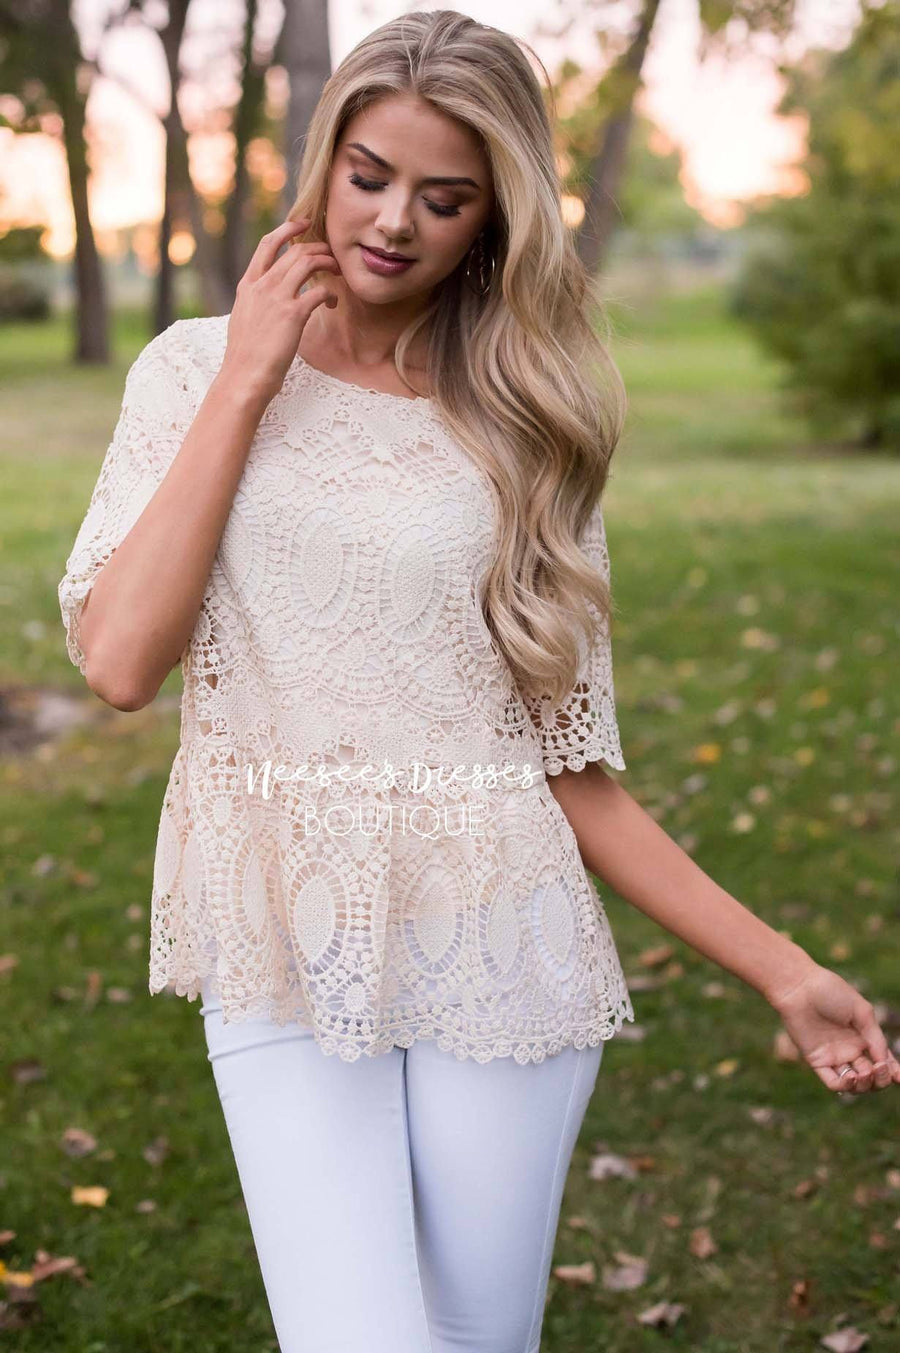 You're So Enchanting Lace Top Tops vendor-unknown 